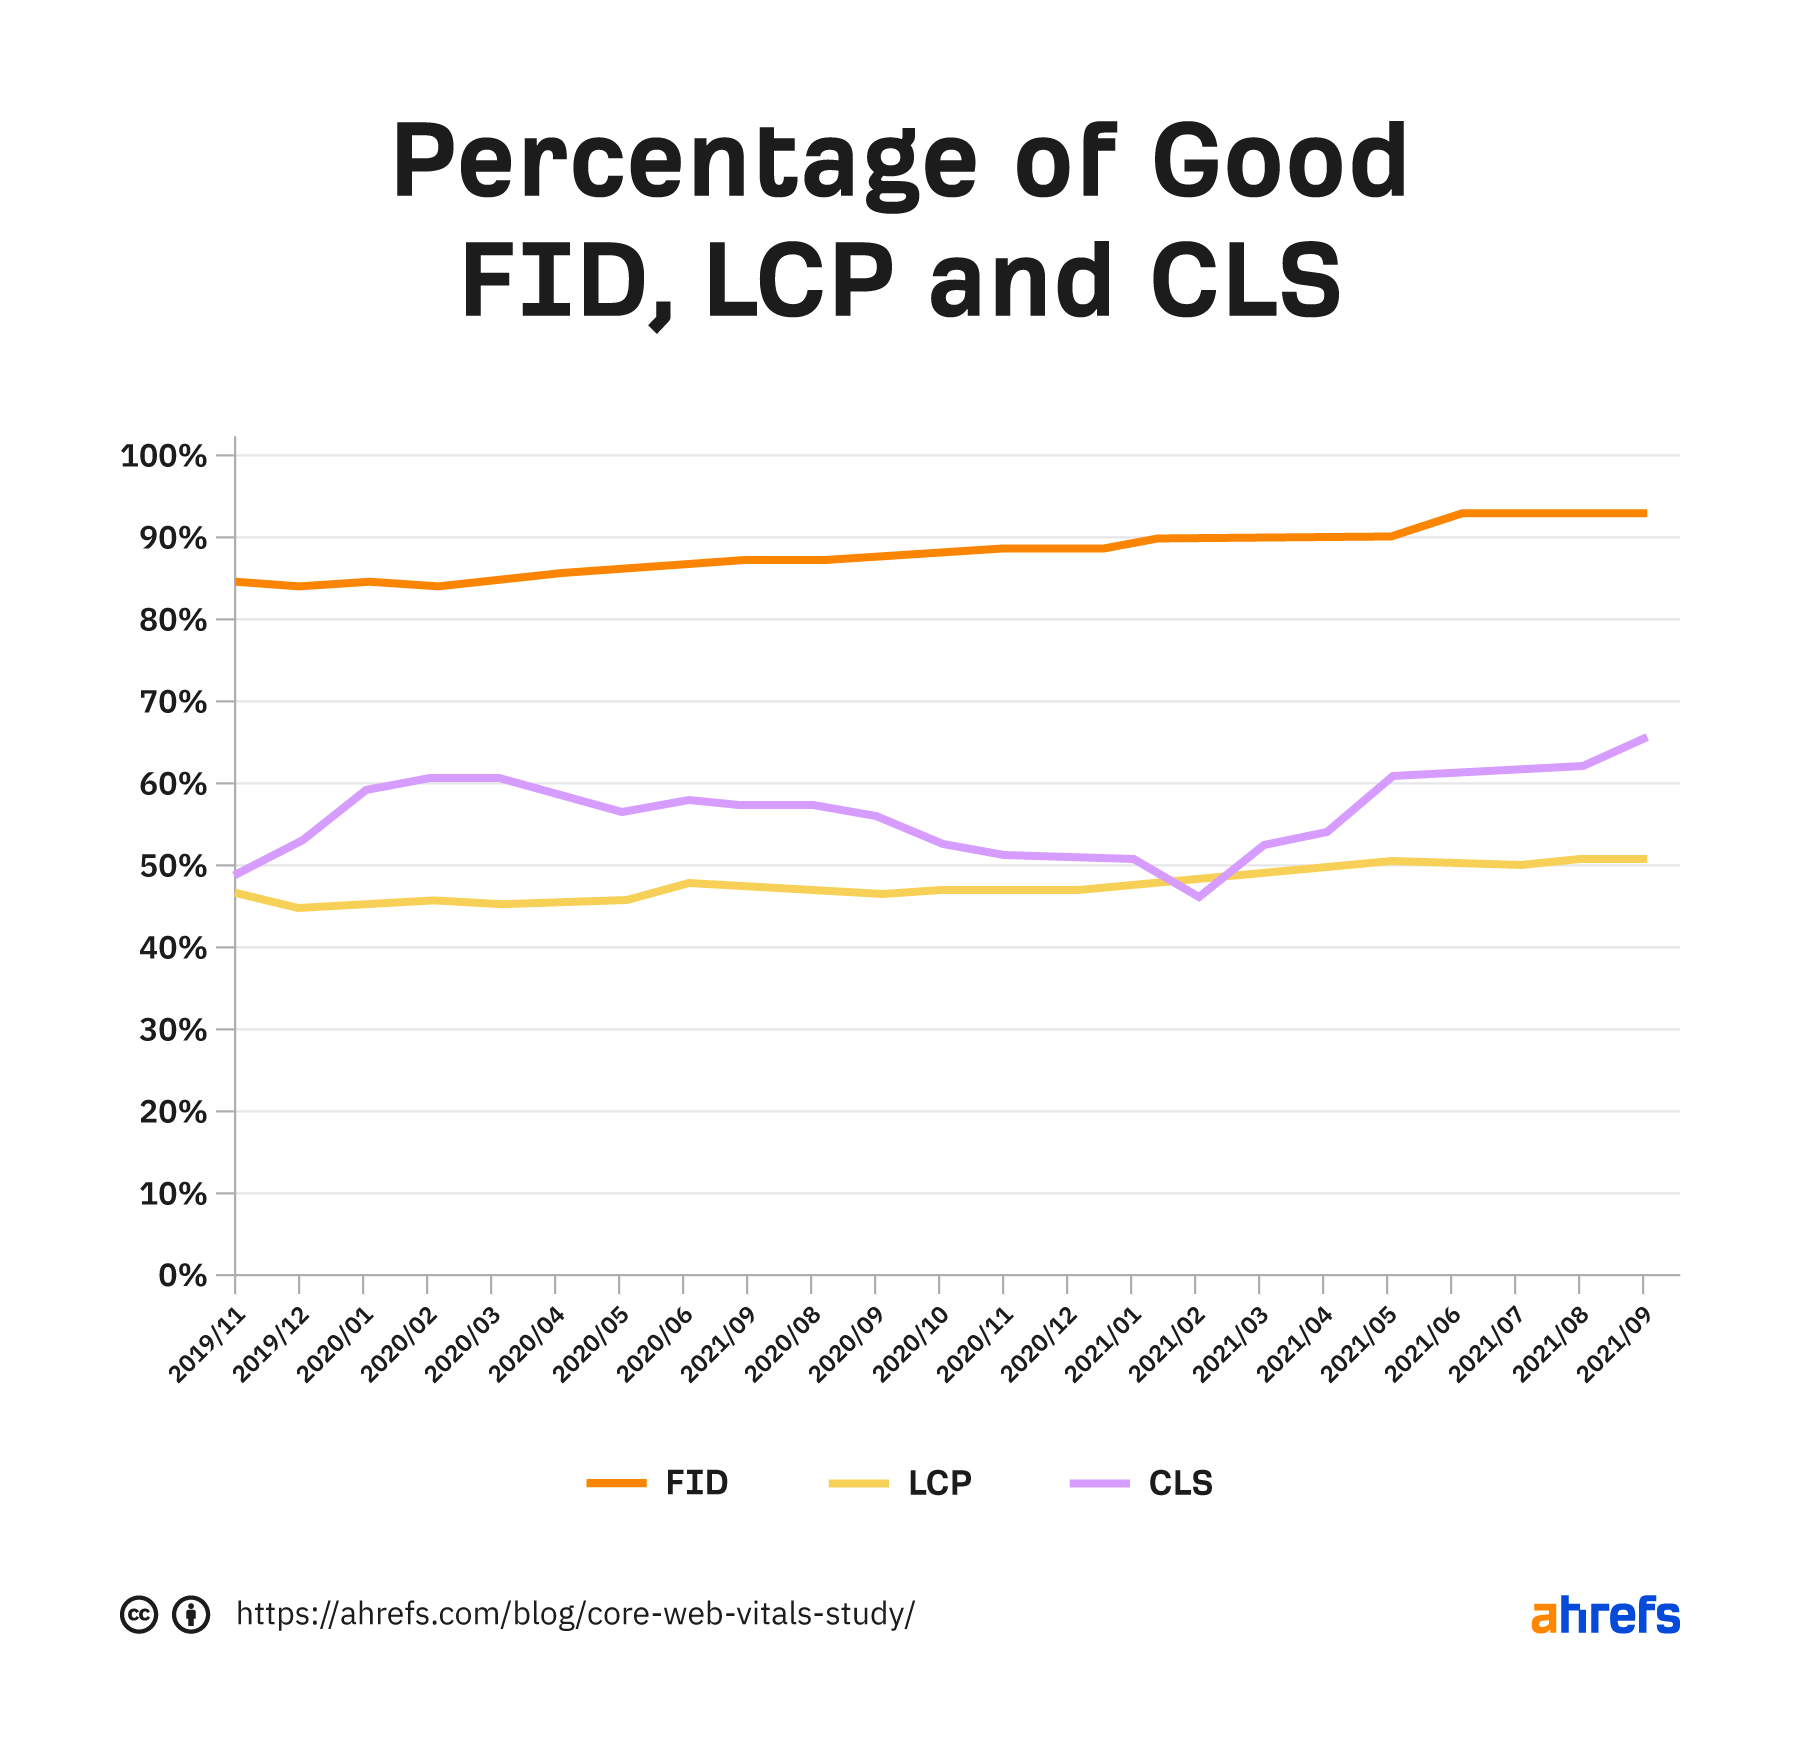 Graph showing percentage of good FID, LCP, and CLS over time